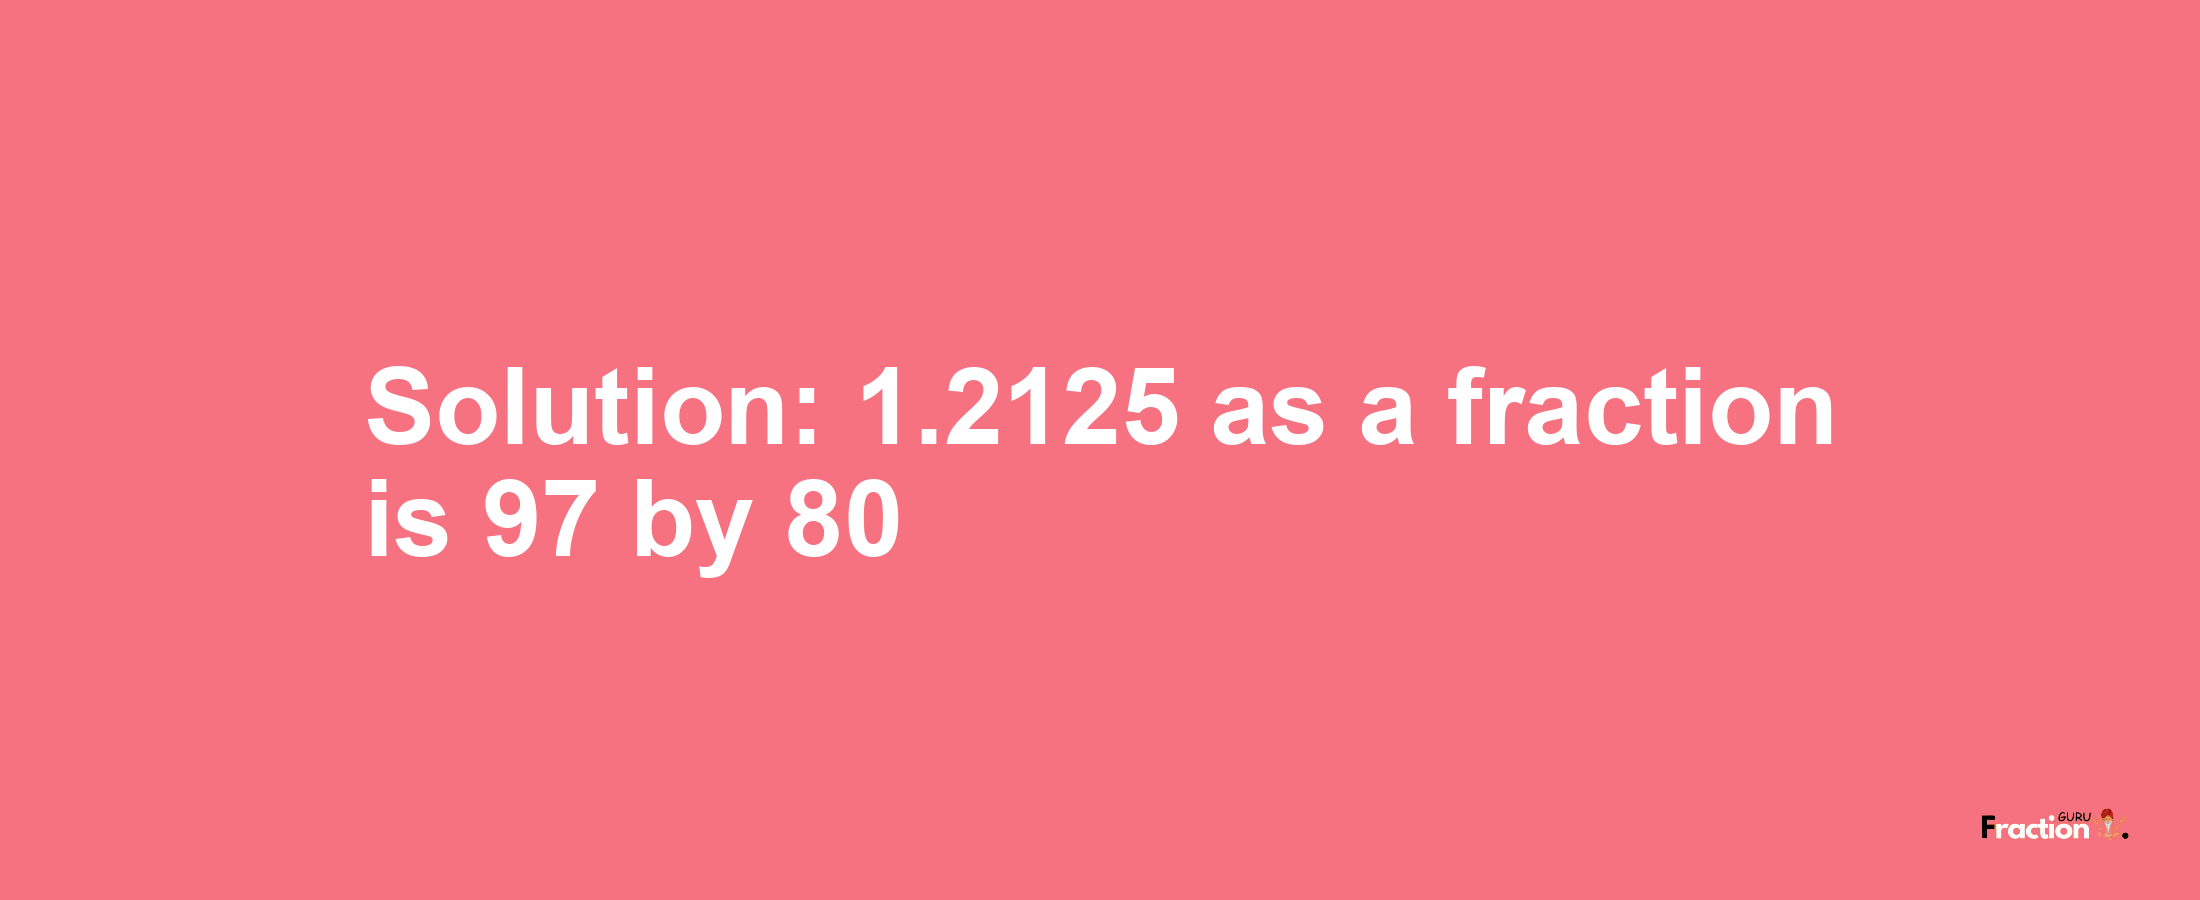 Solution:1.2125 as a fraction is 97/80